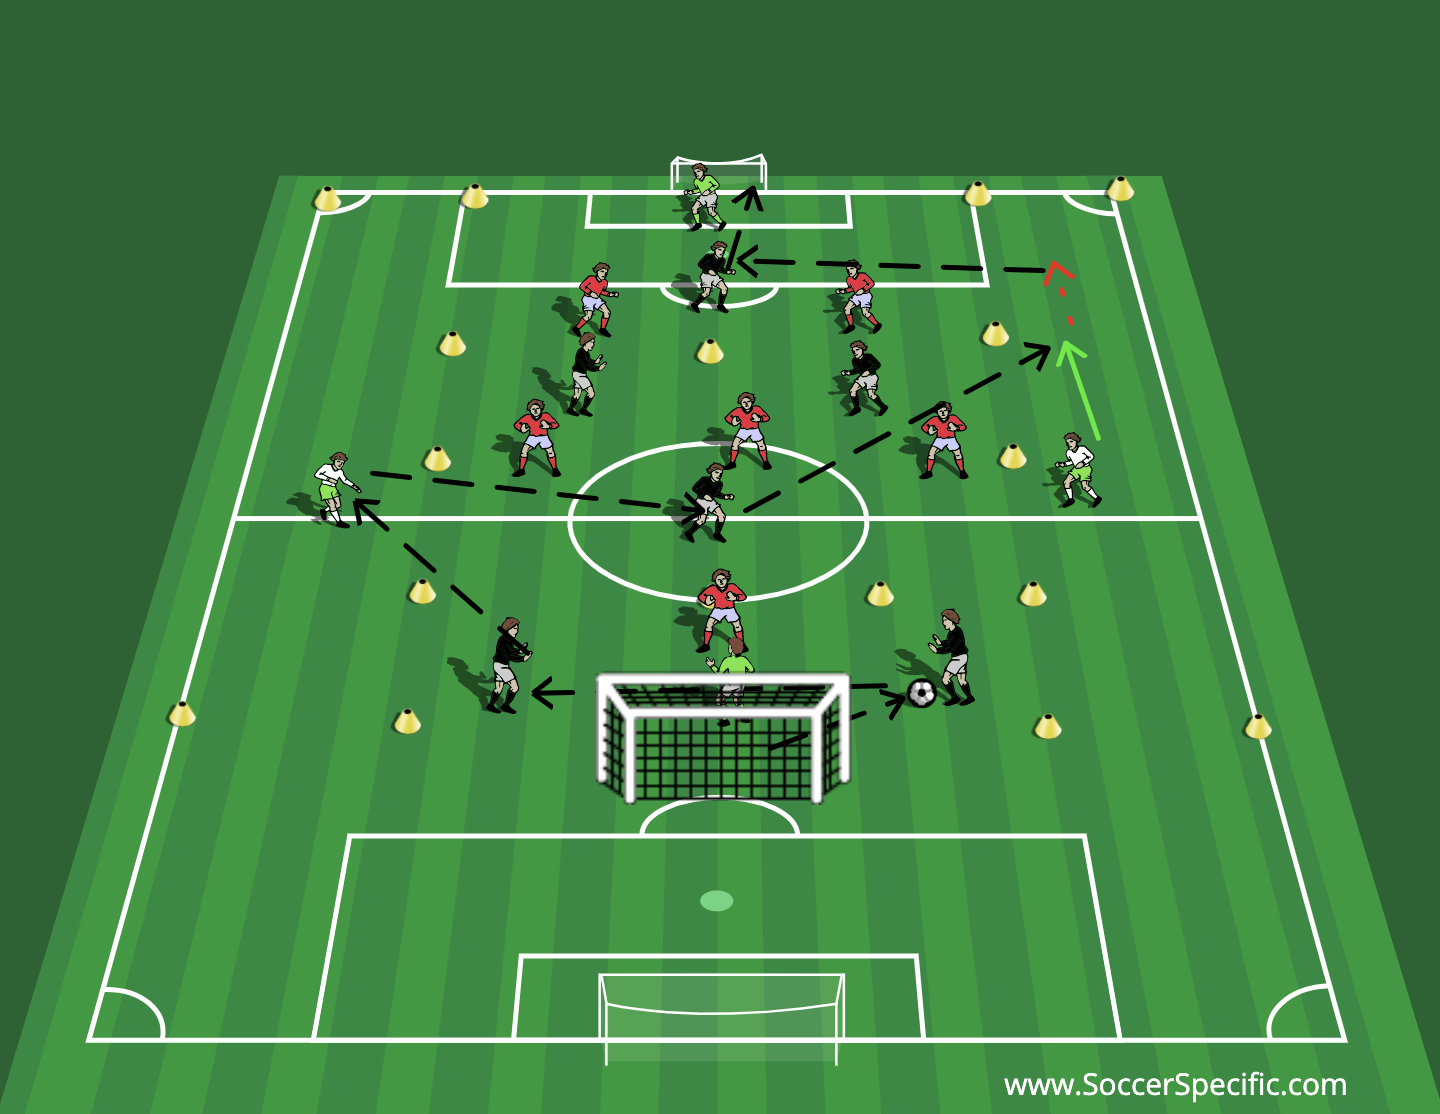 Switching Play to Penetrate | SoccerSpecific.com